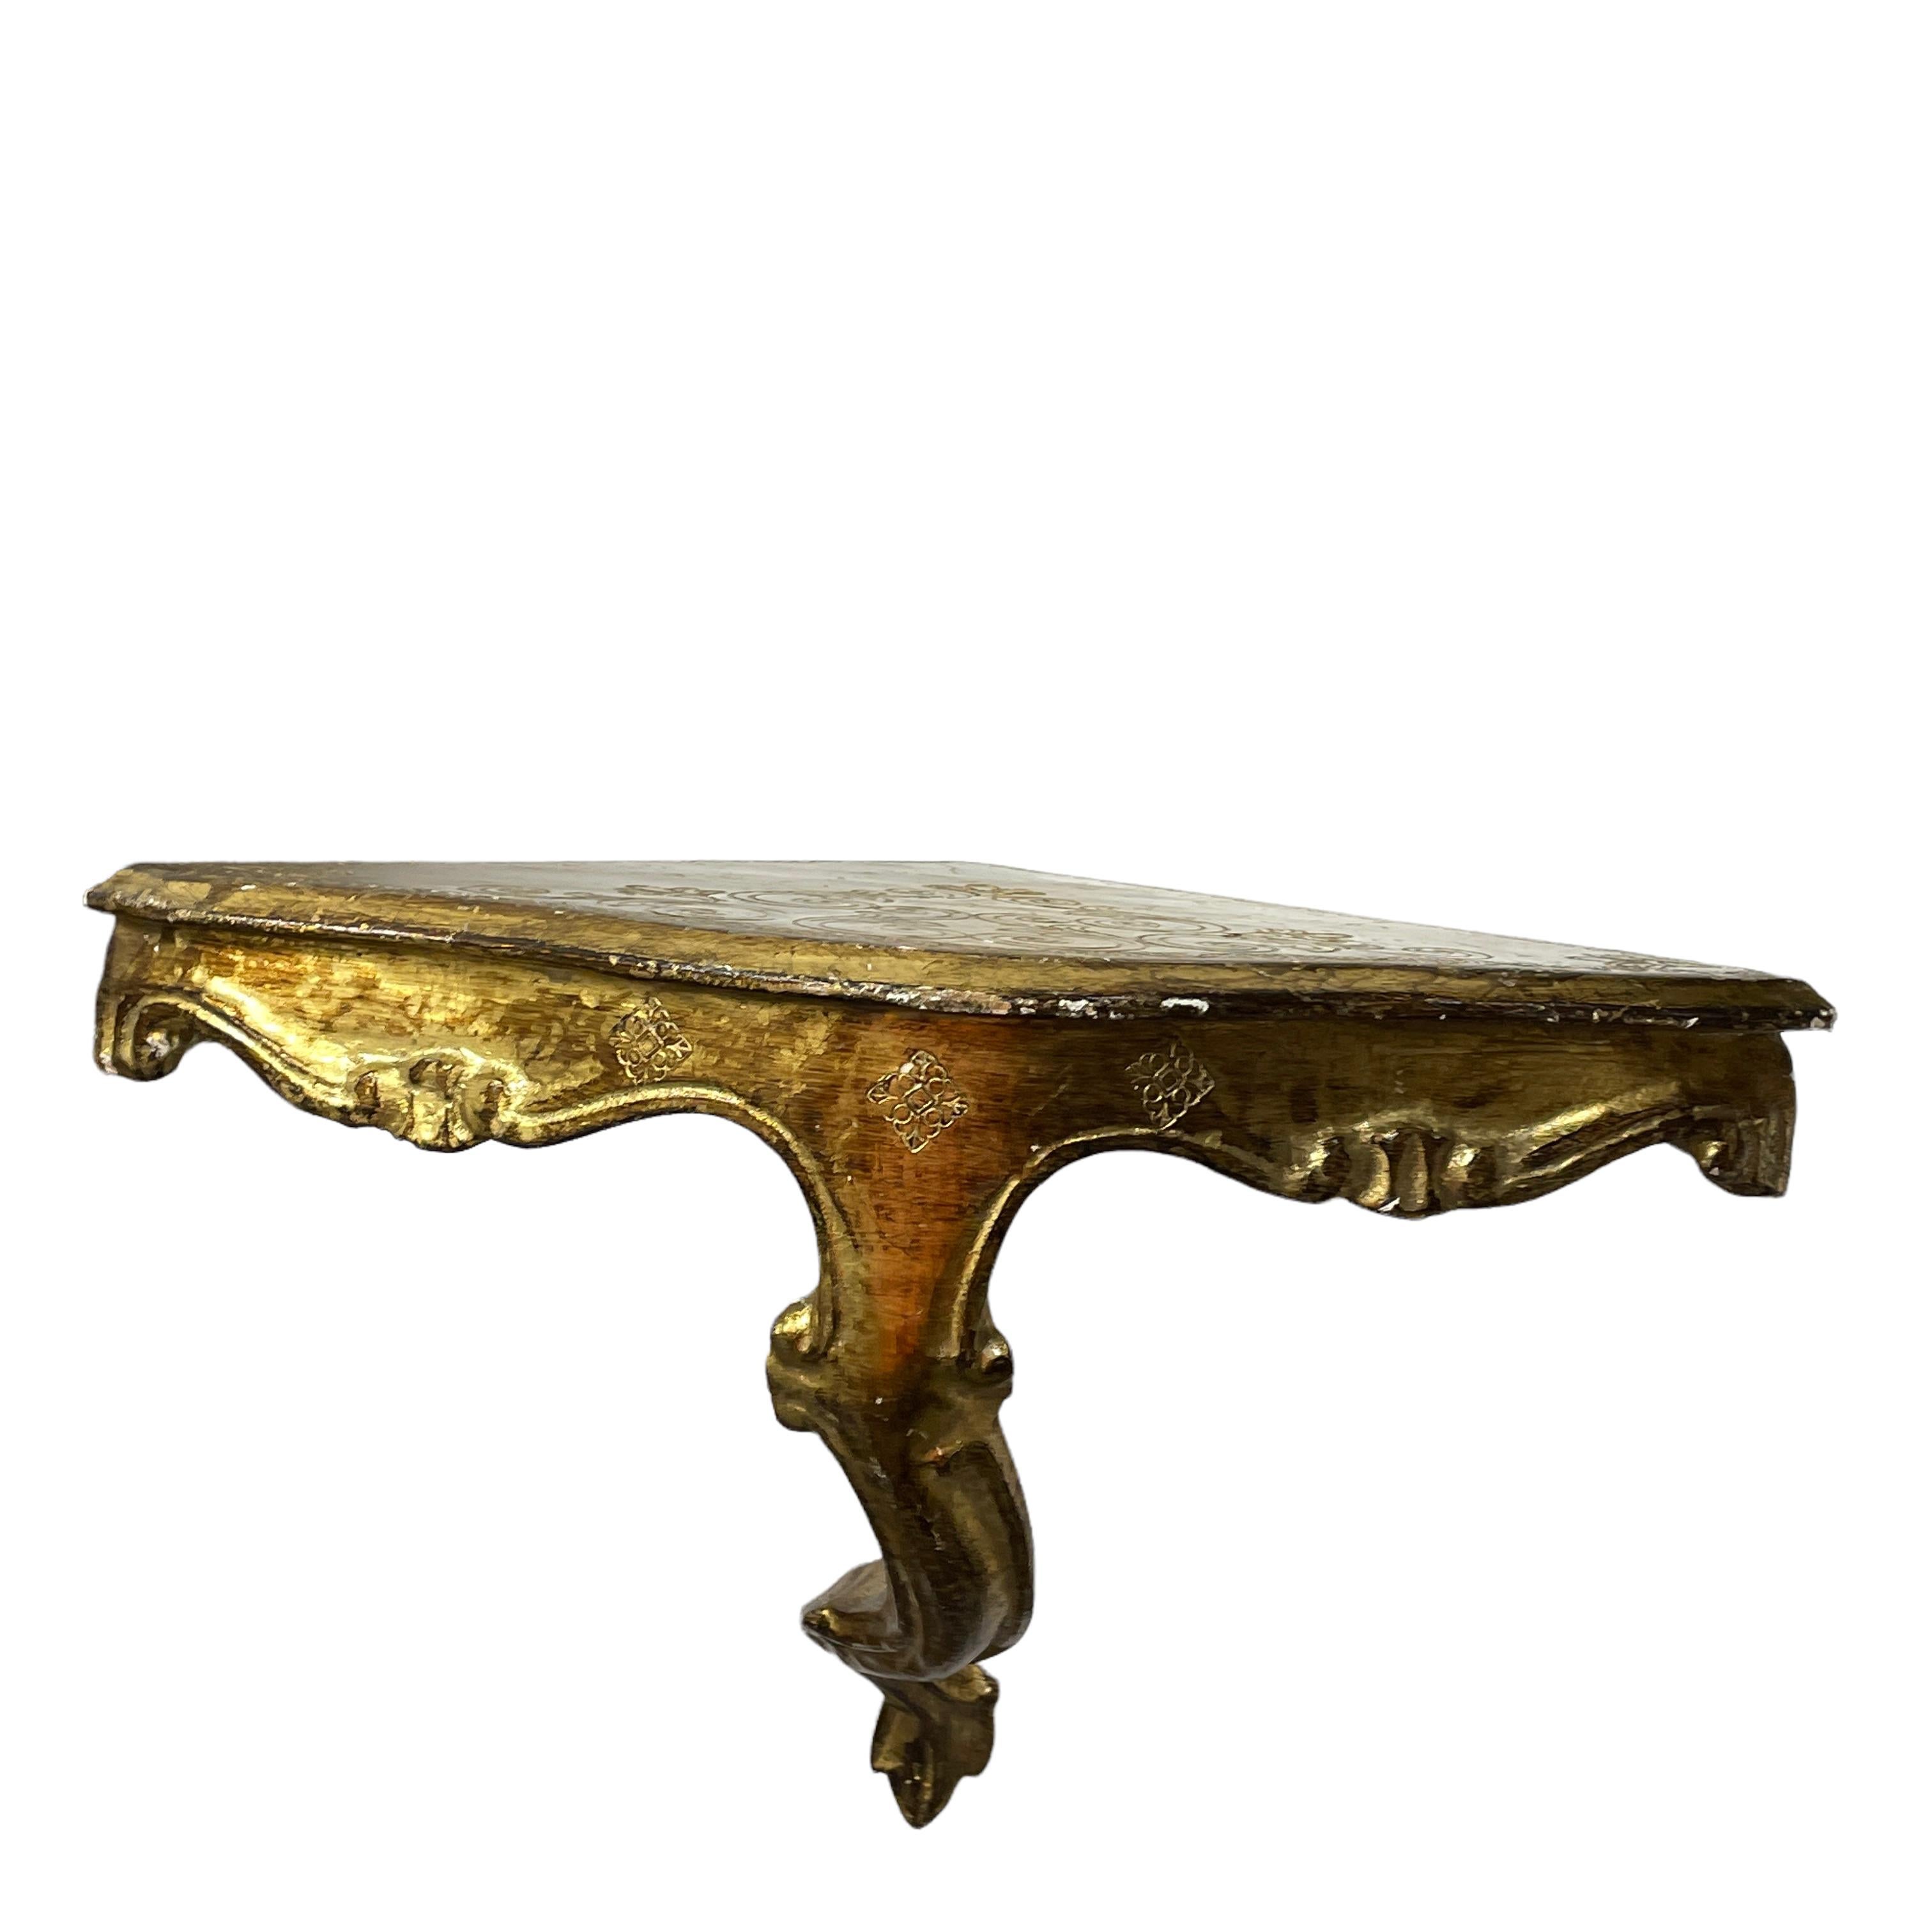 Vintage Florence Wall Corner Shelf Console, Gilded Carved Wood, Florentine Style For Sale 7